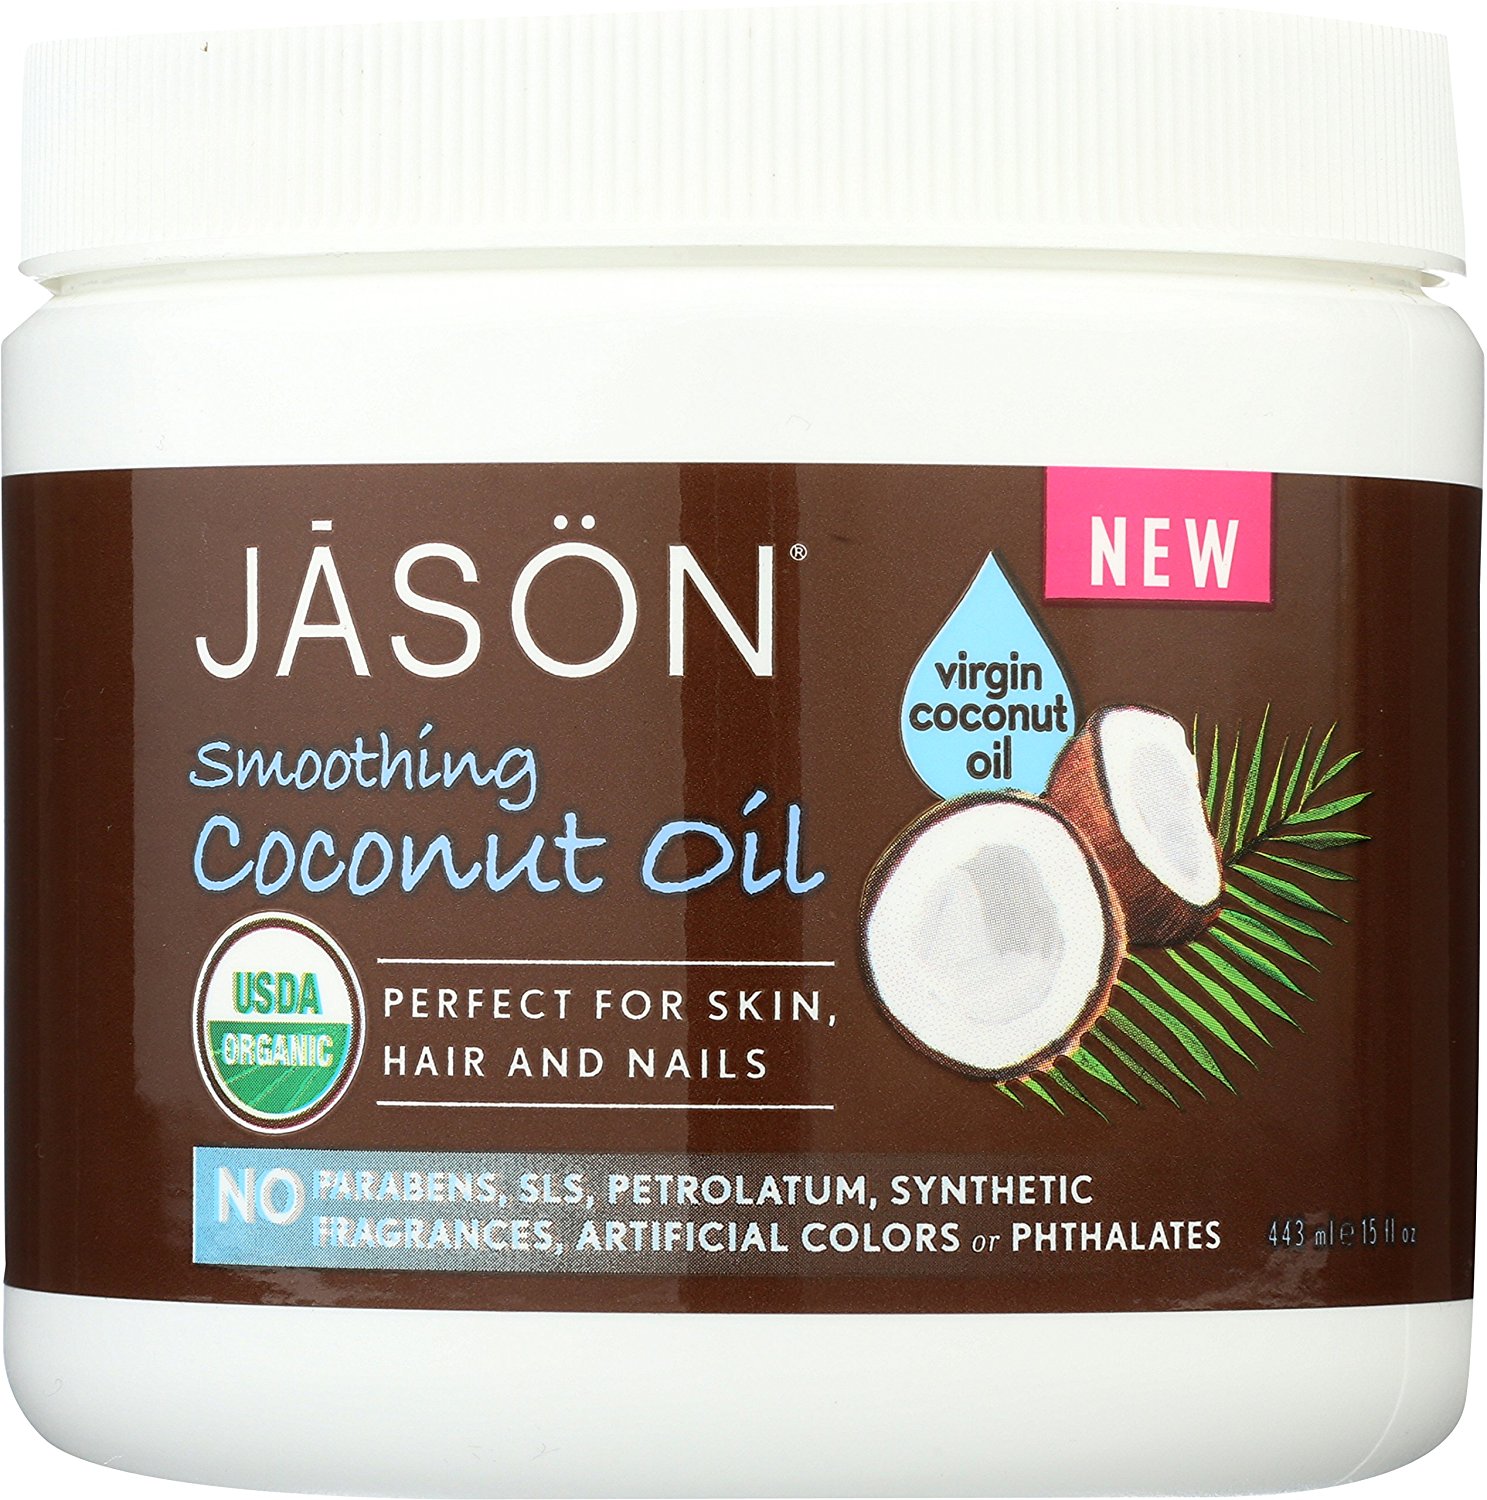 jason smoothing coconut oil